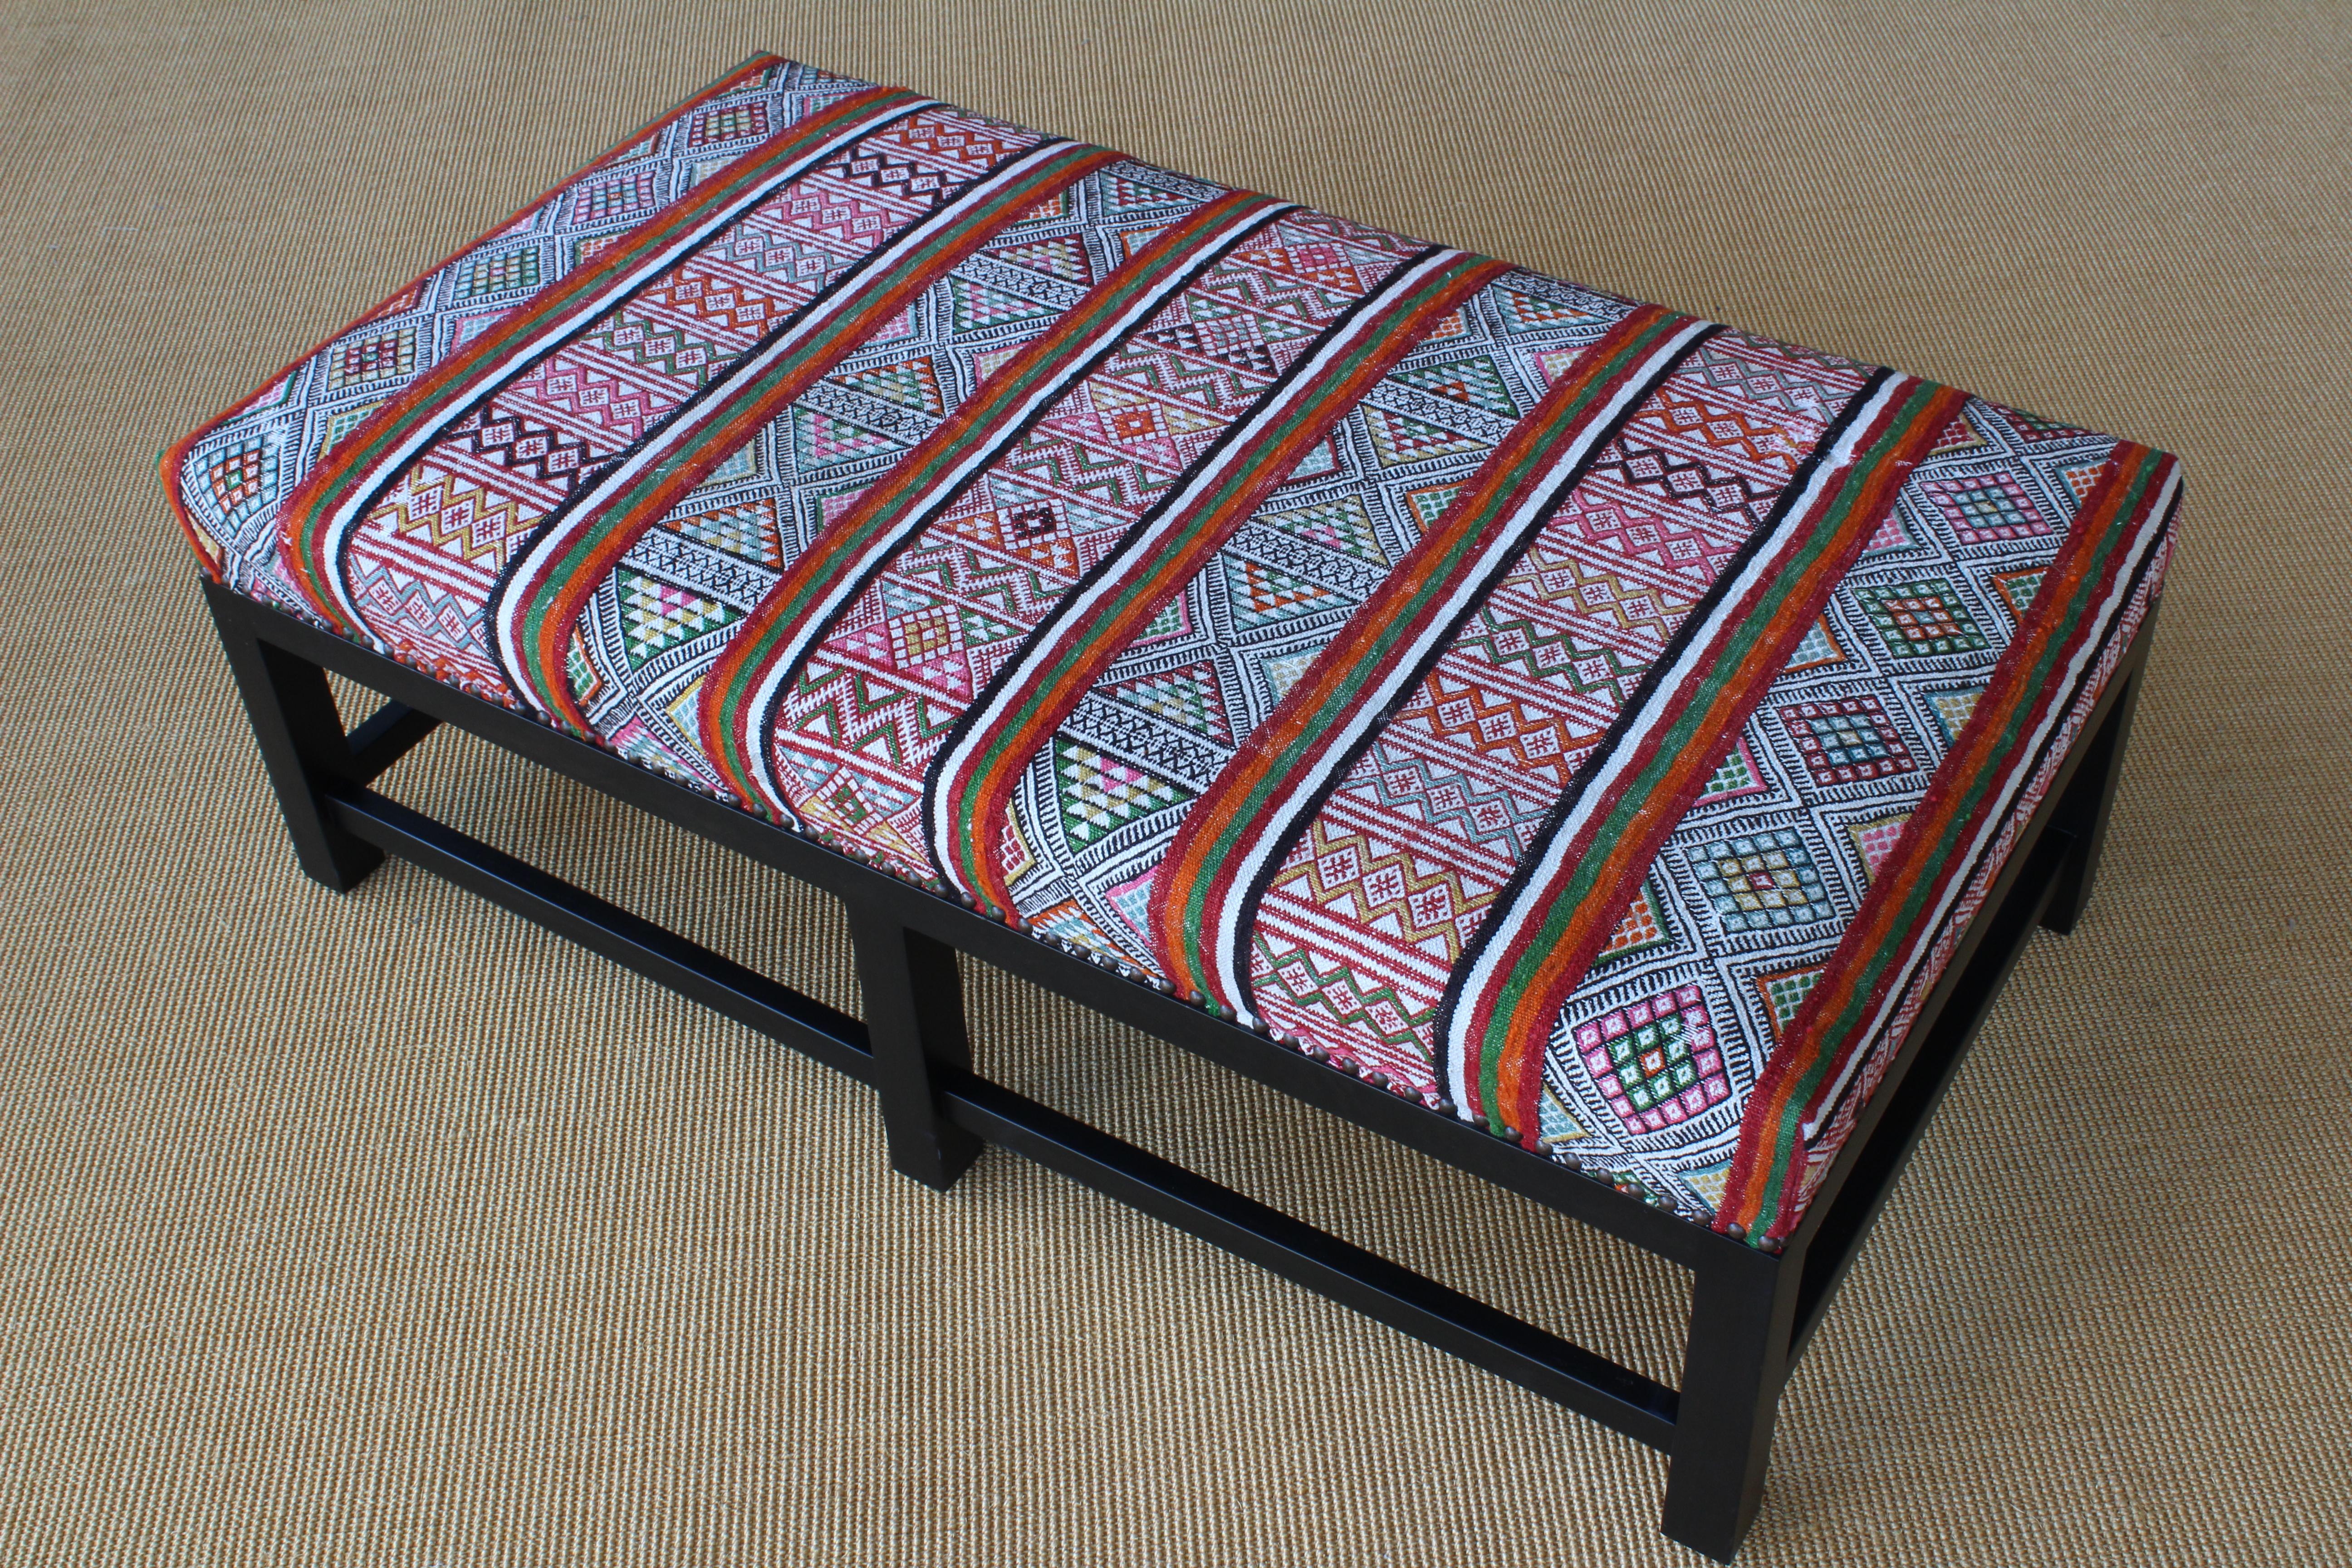 Custom ottoman with a solid wood base and upholstered in a vibrant vintage textile.